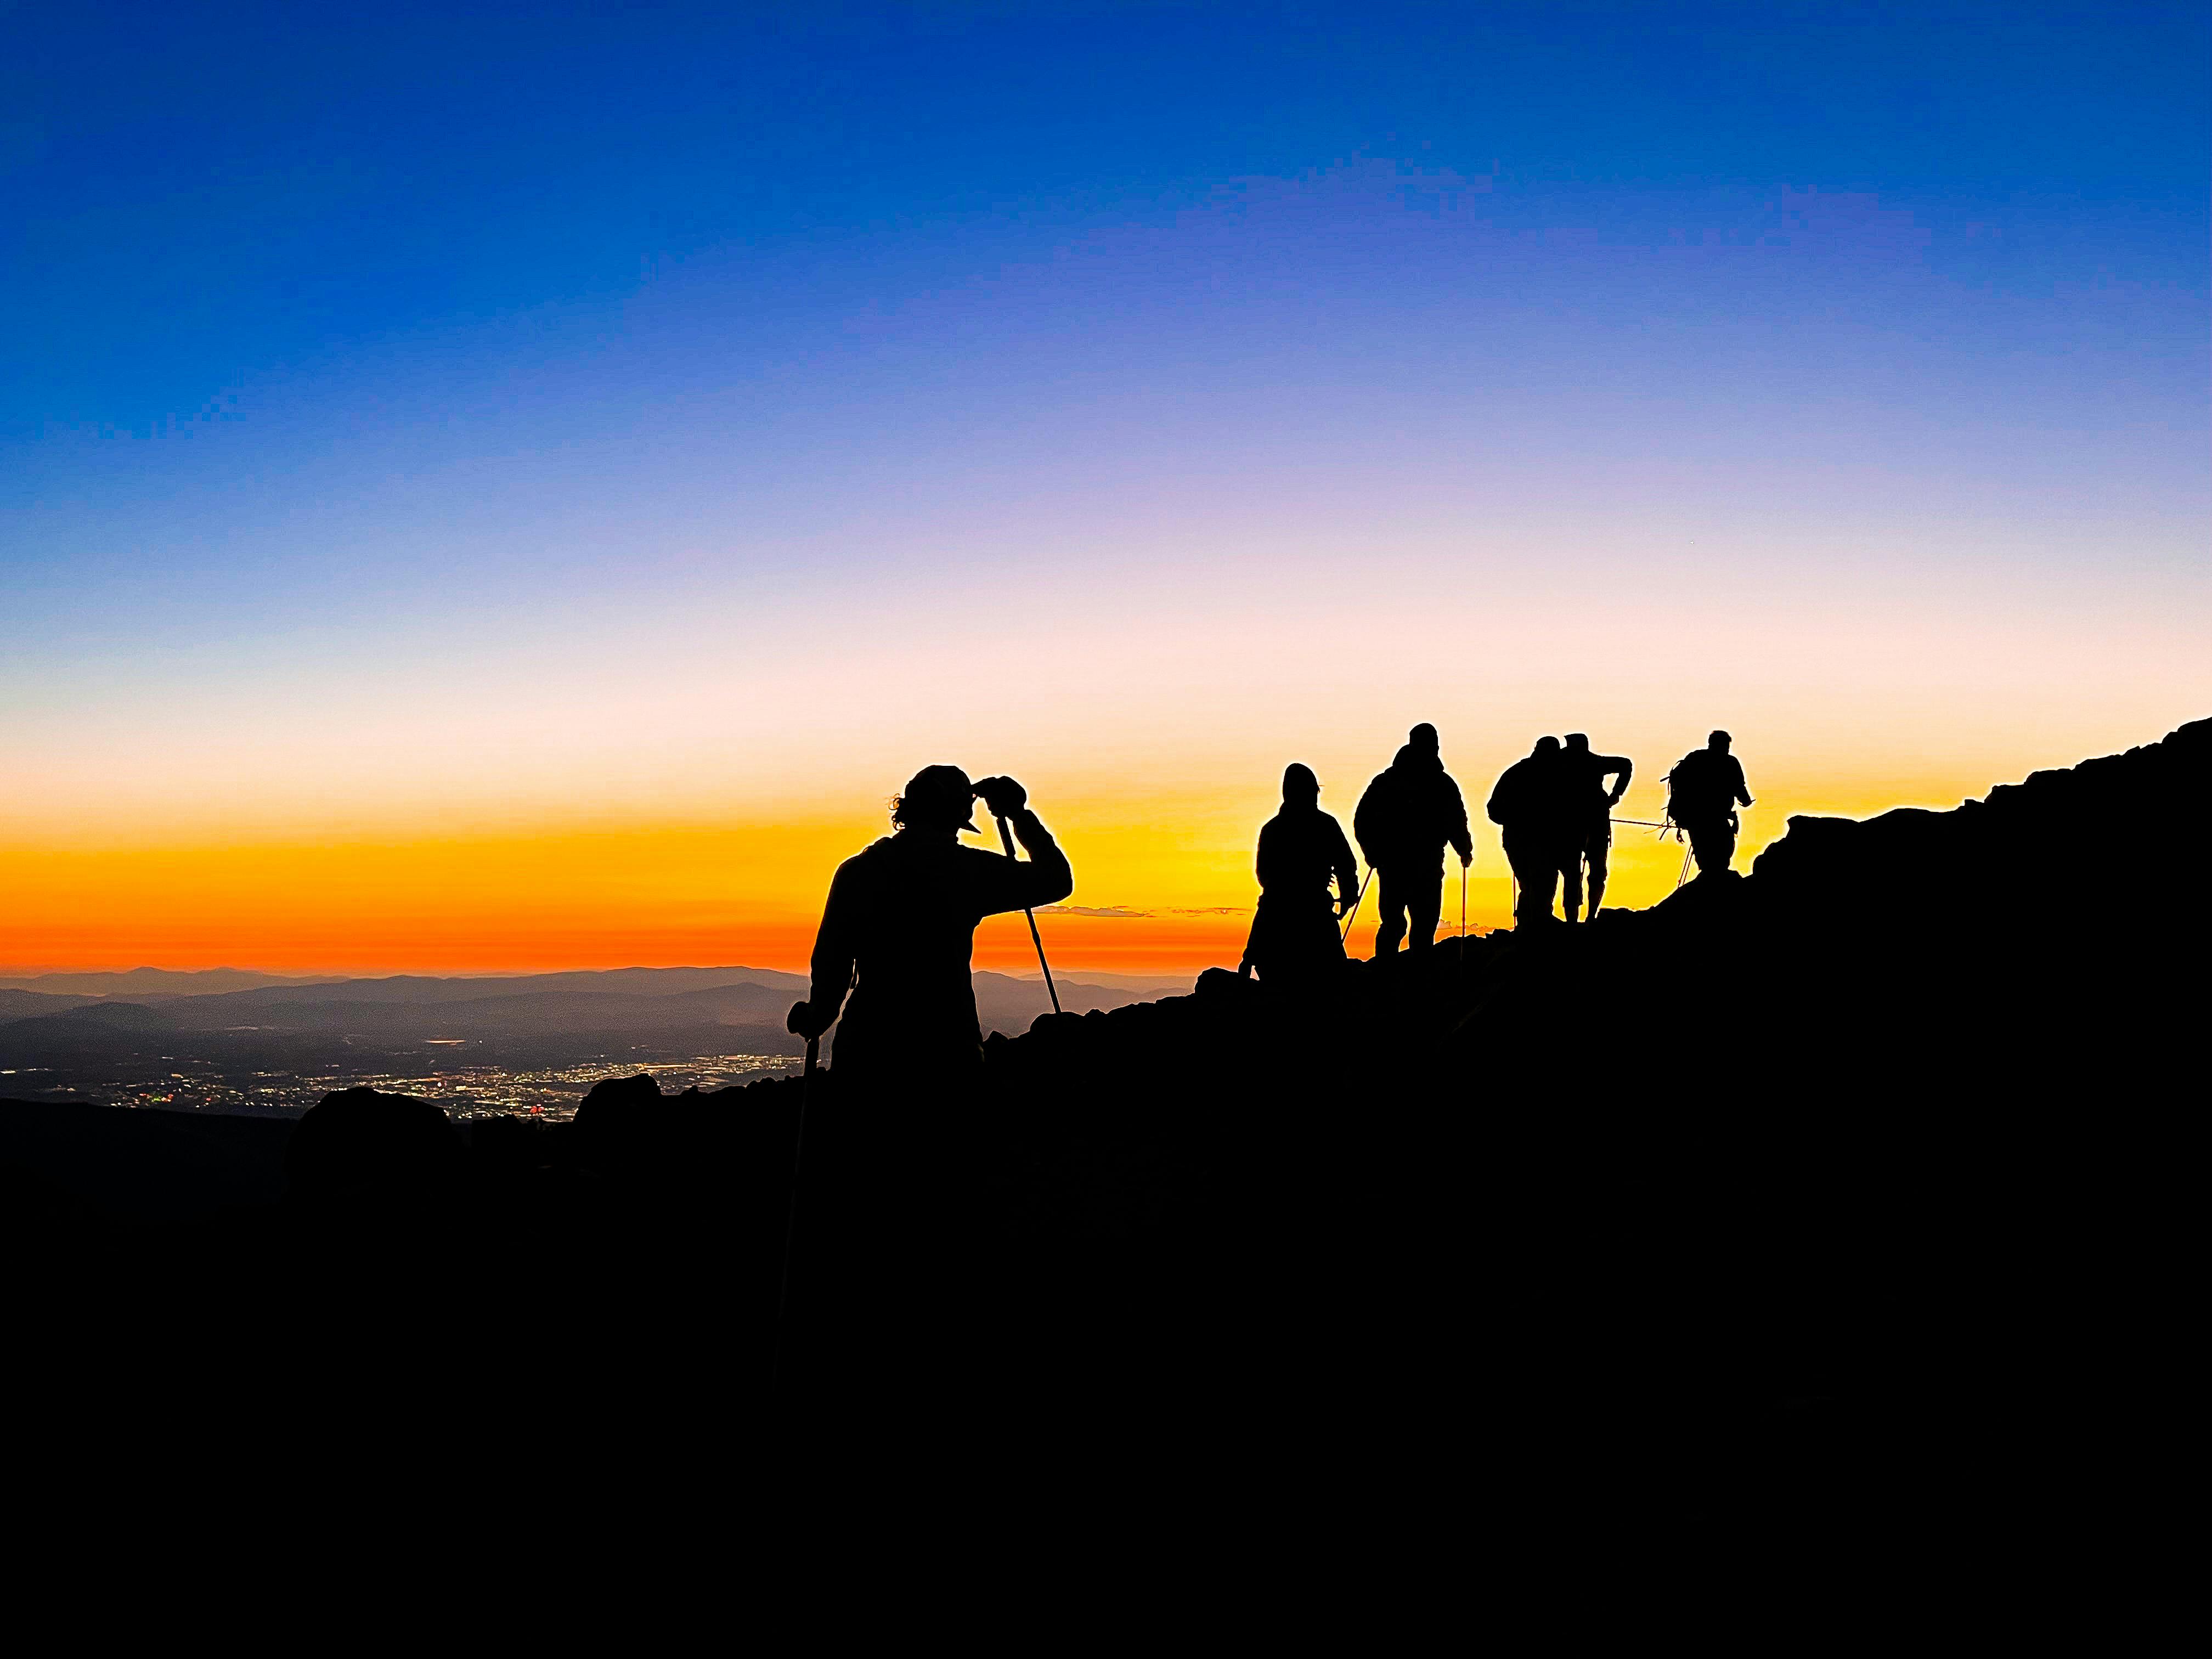 A group of hikers walks along a ridge at sunset or sunrise with a sparkling city in the valley below them.